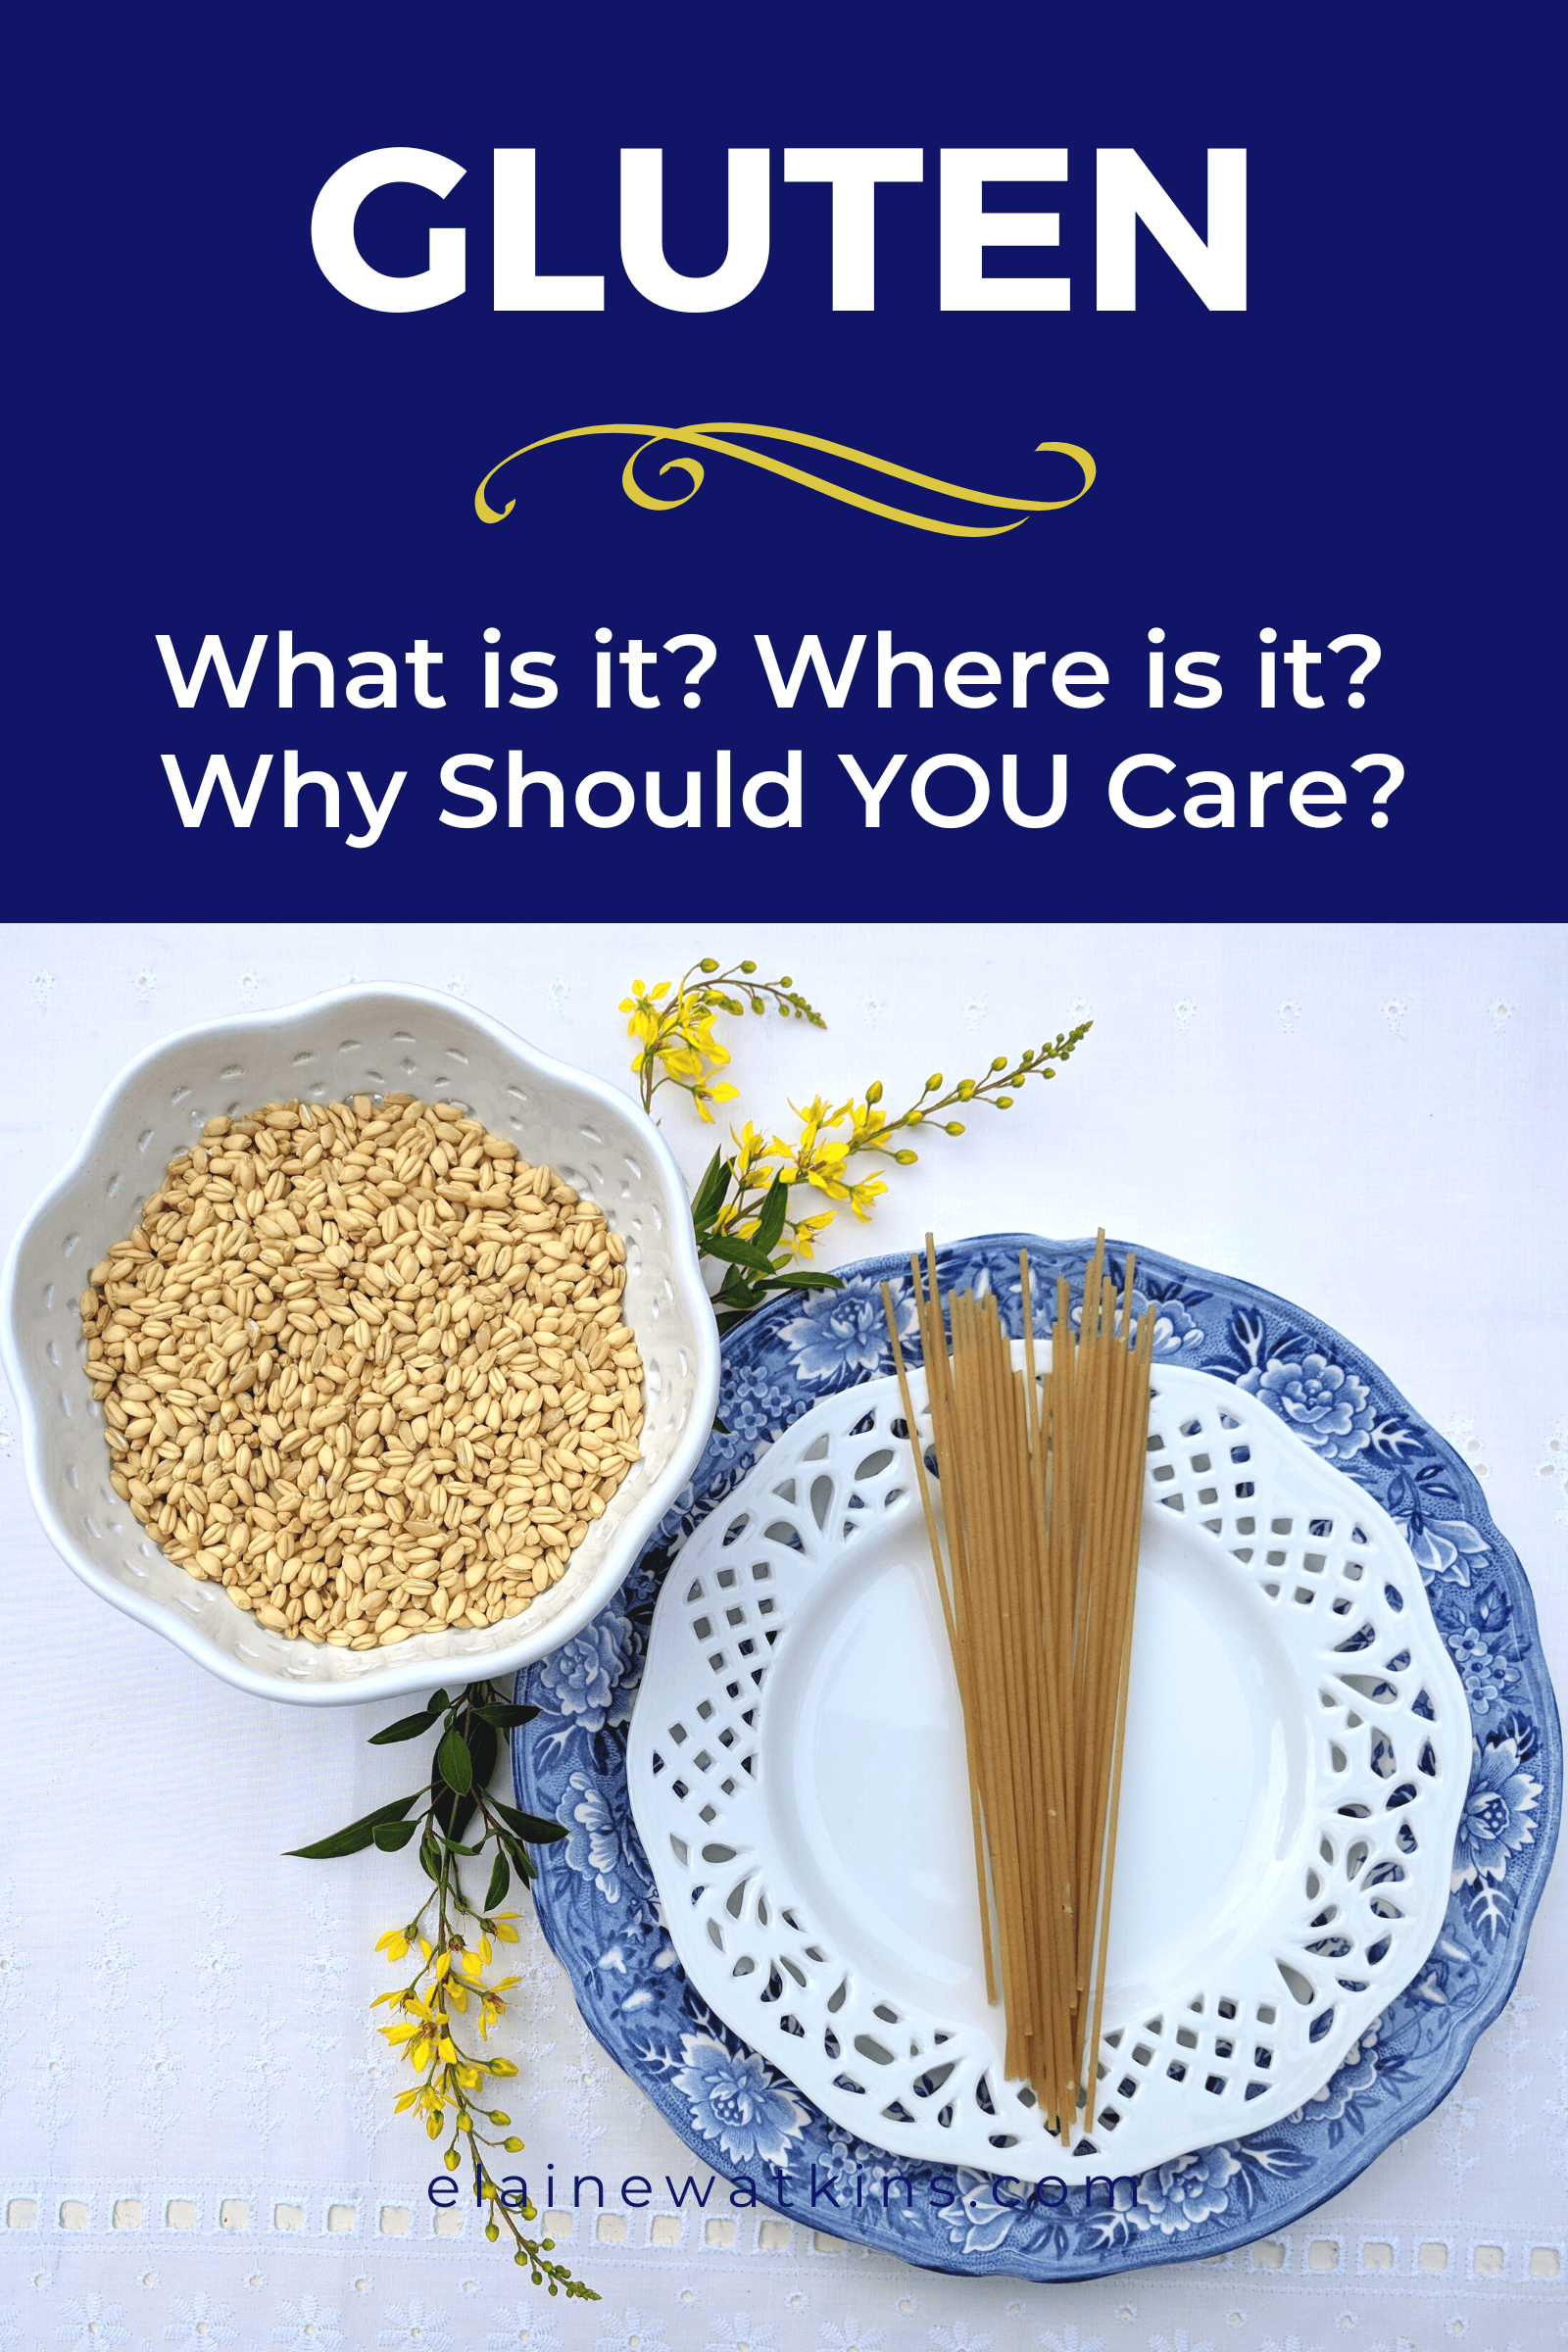 What is Gluten? Where is Gluten? and Why Should YOU Care?